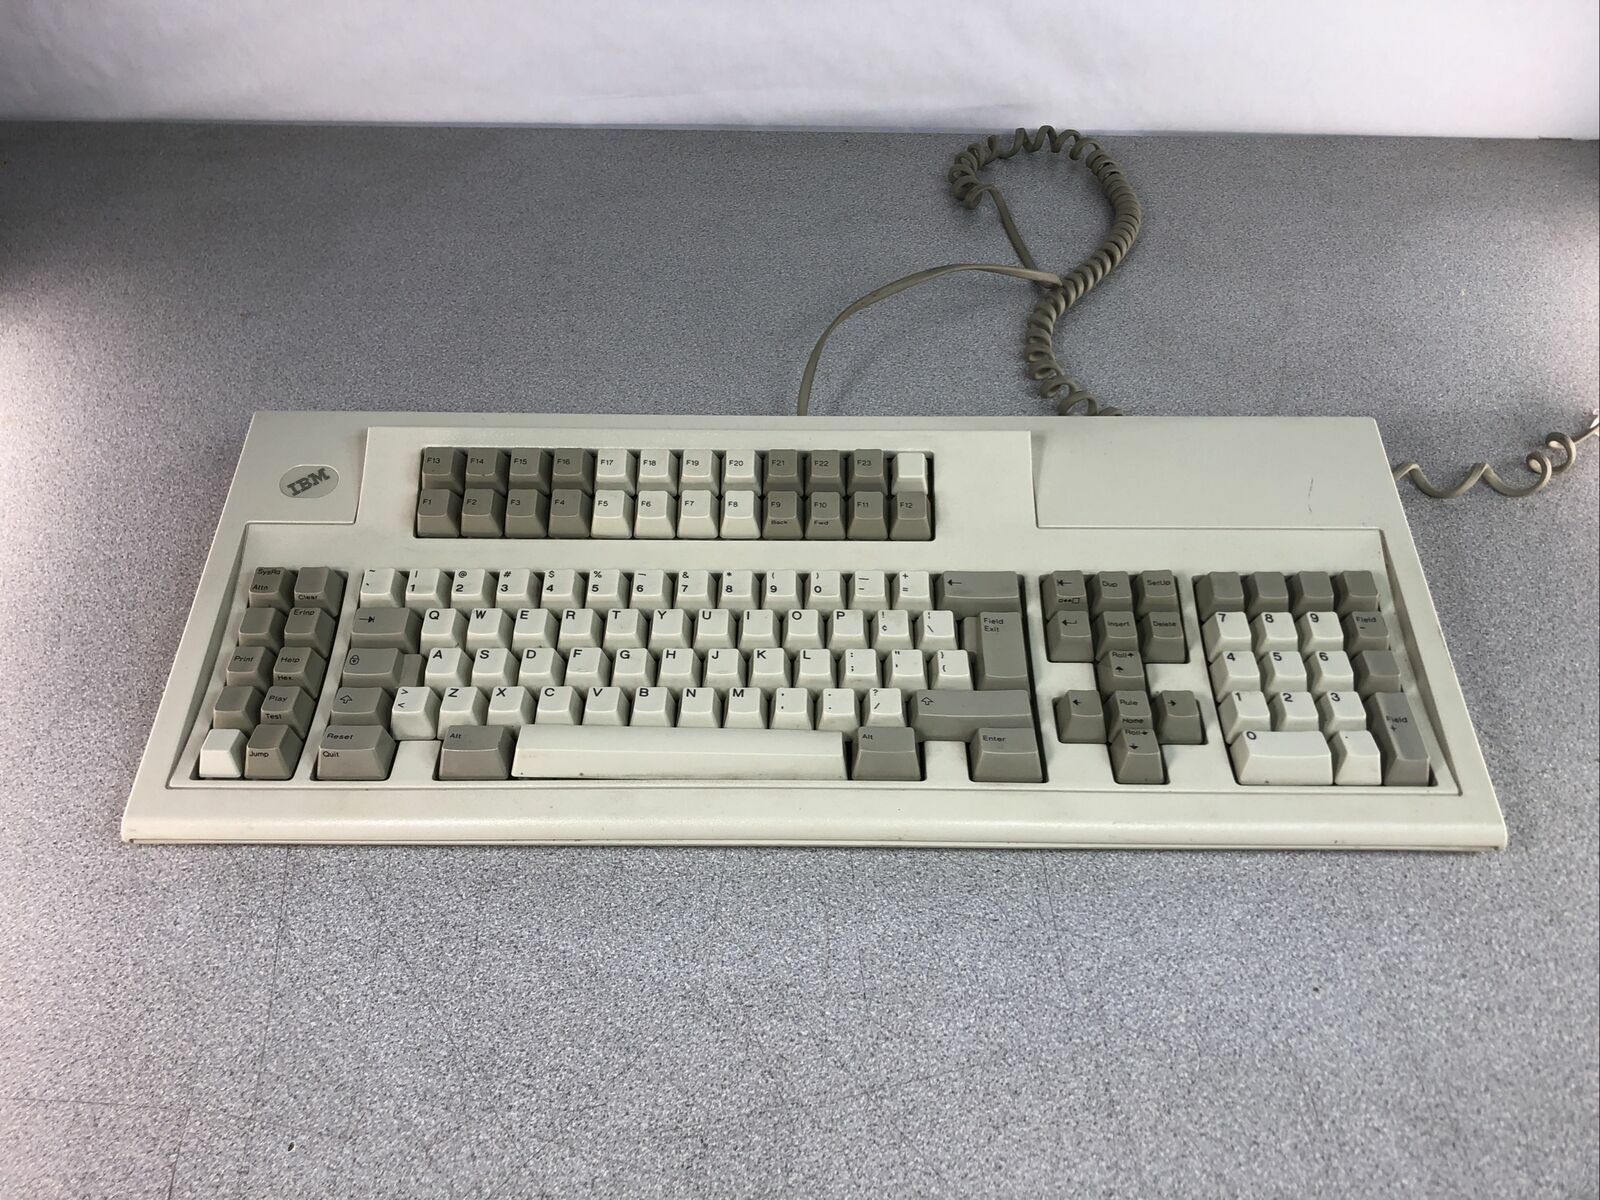 IBM 122-Key Terminal Clicky Keyboard Model M 1395660 Vintage w/Curly Cable 